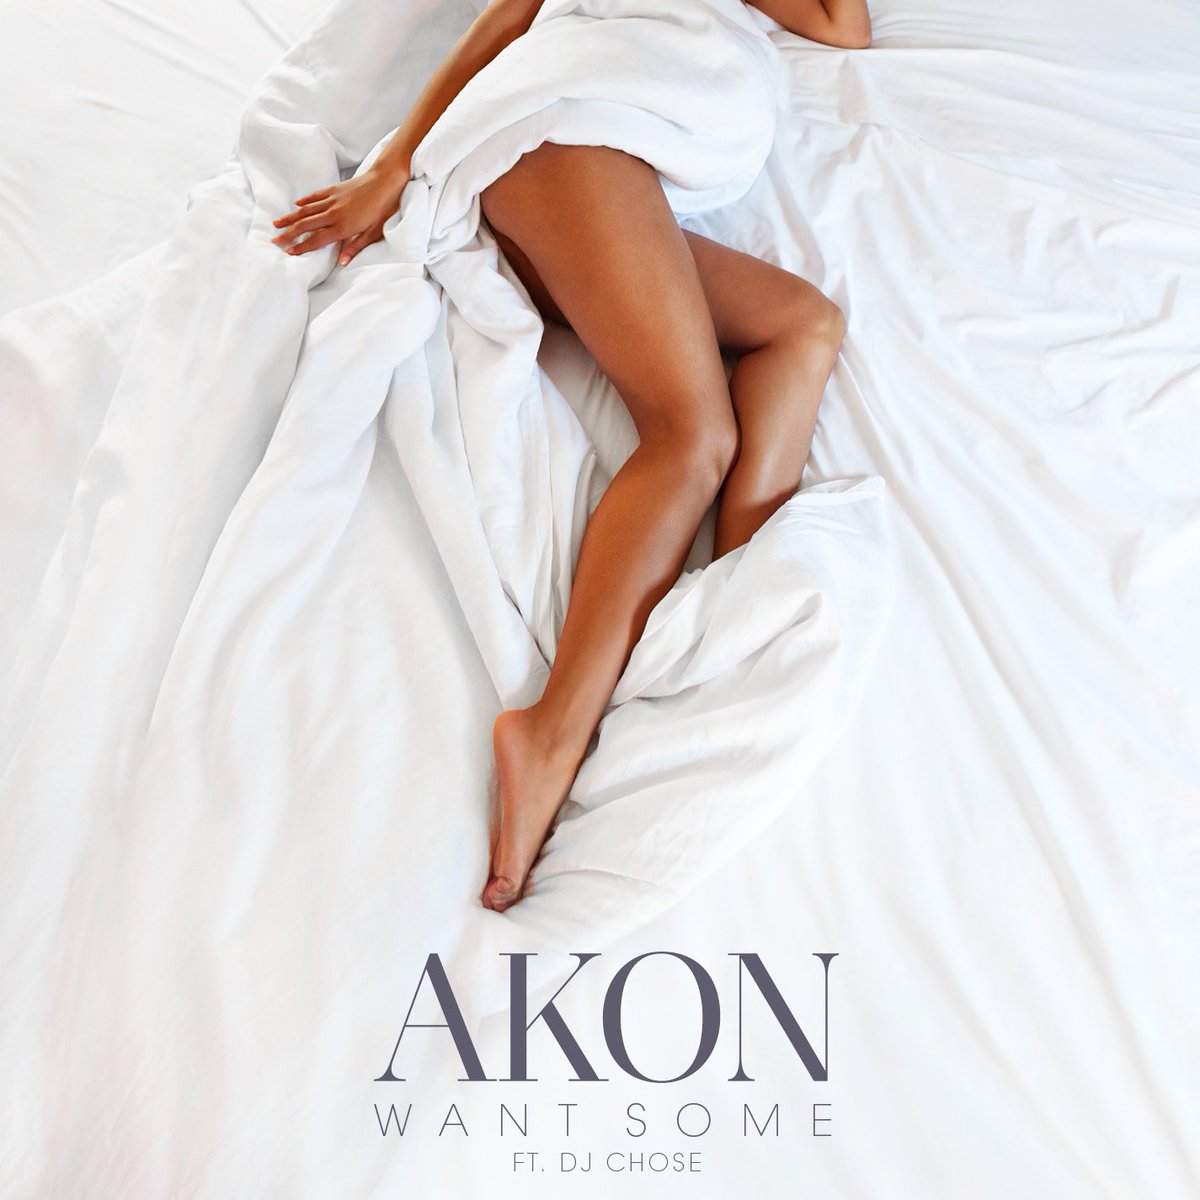 RT @AtlanticRecords: NEW MUSIC: Want some new @Akon music? Check out “Want Some” out now!  https://t.co/MnKYCT1rm8 https://t.co/yBN7qb1BLQ